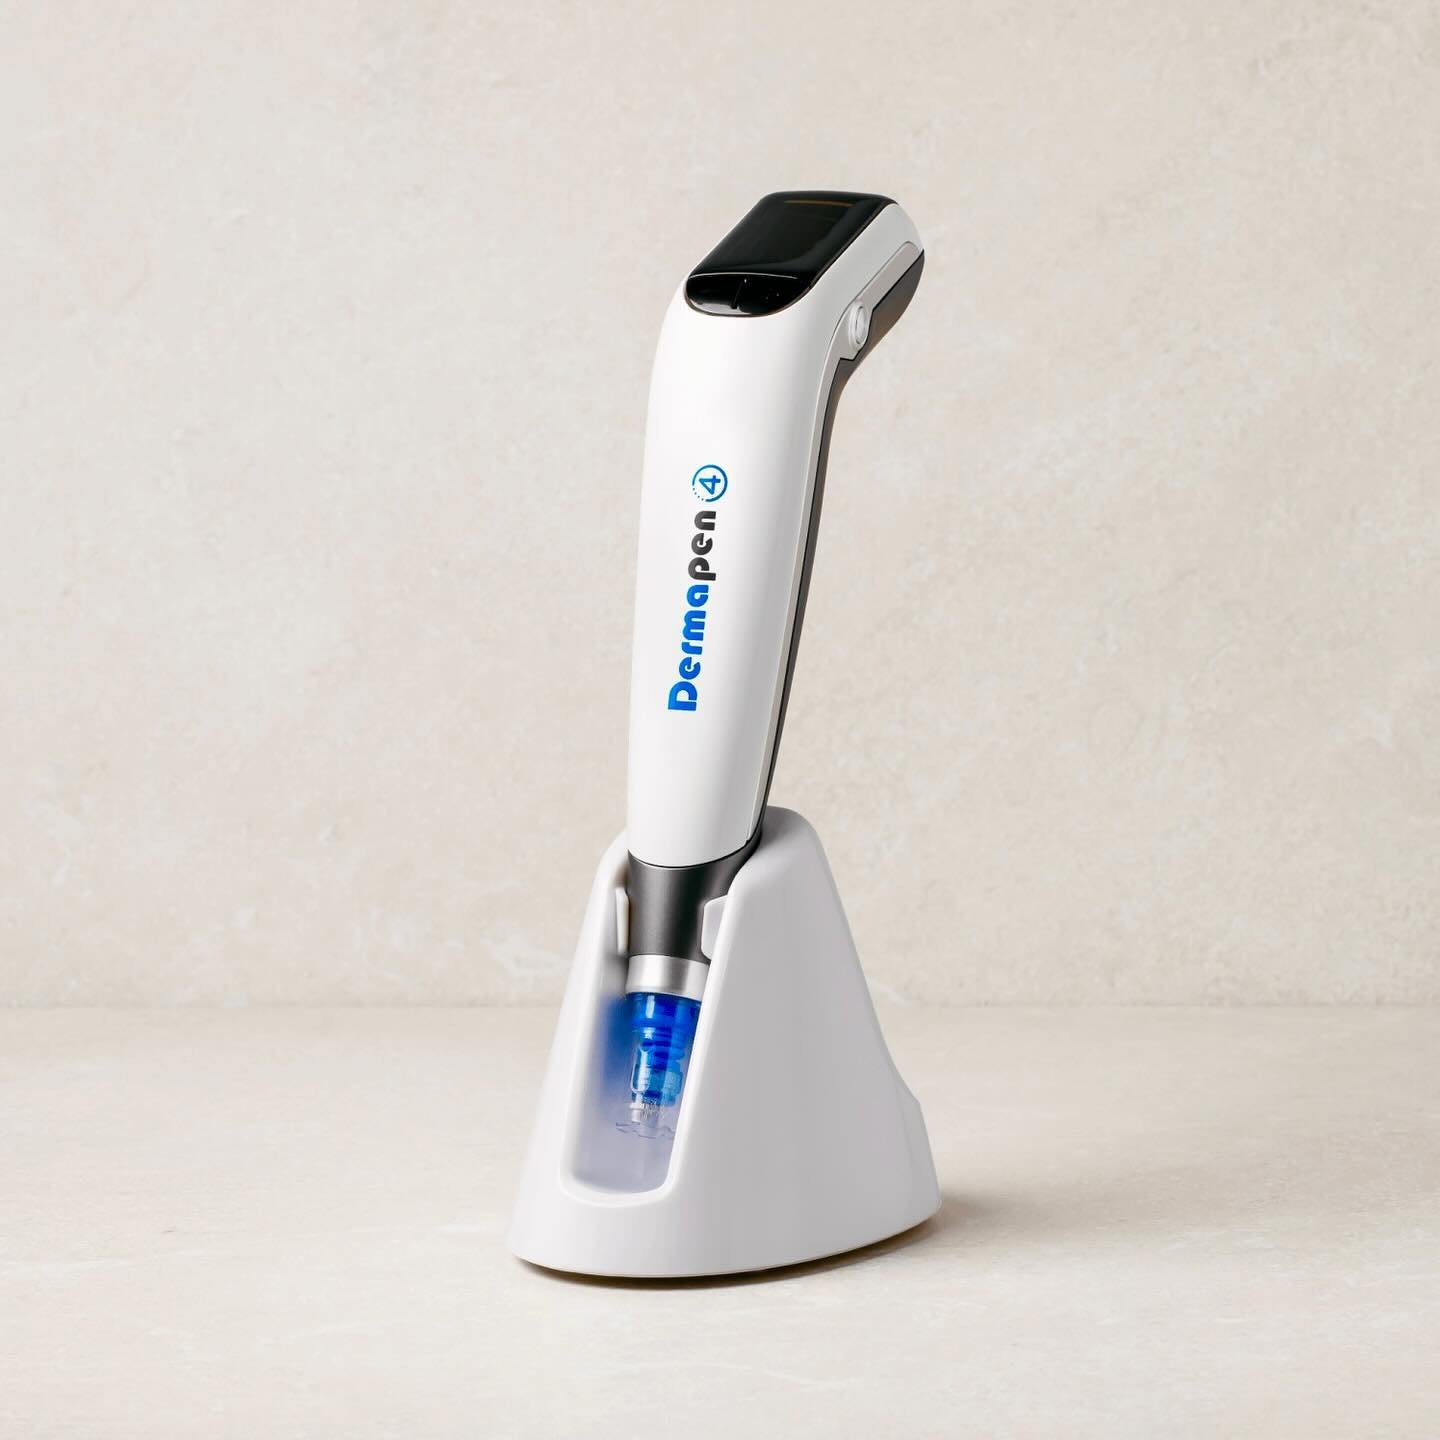 Skin needling wirh Dermapen 4, how does it work? 

&gt; Dermapen 4 glides over the skin creating millions of fine, vertical fractional channels up to 104% faster than other microneedling pens. 

&gt; These channels can carry up to 80% more topical nu